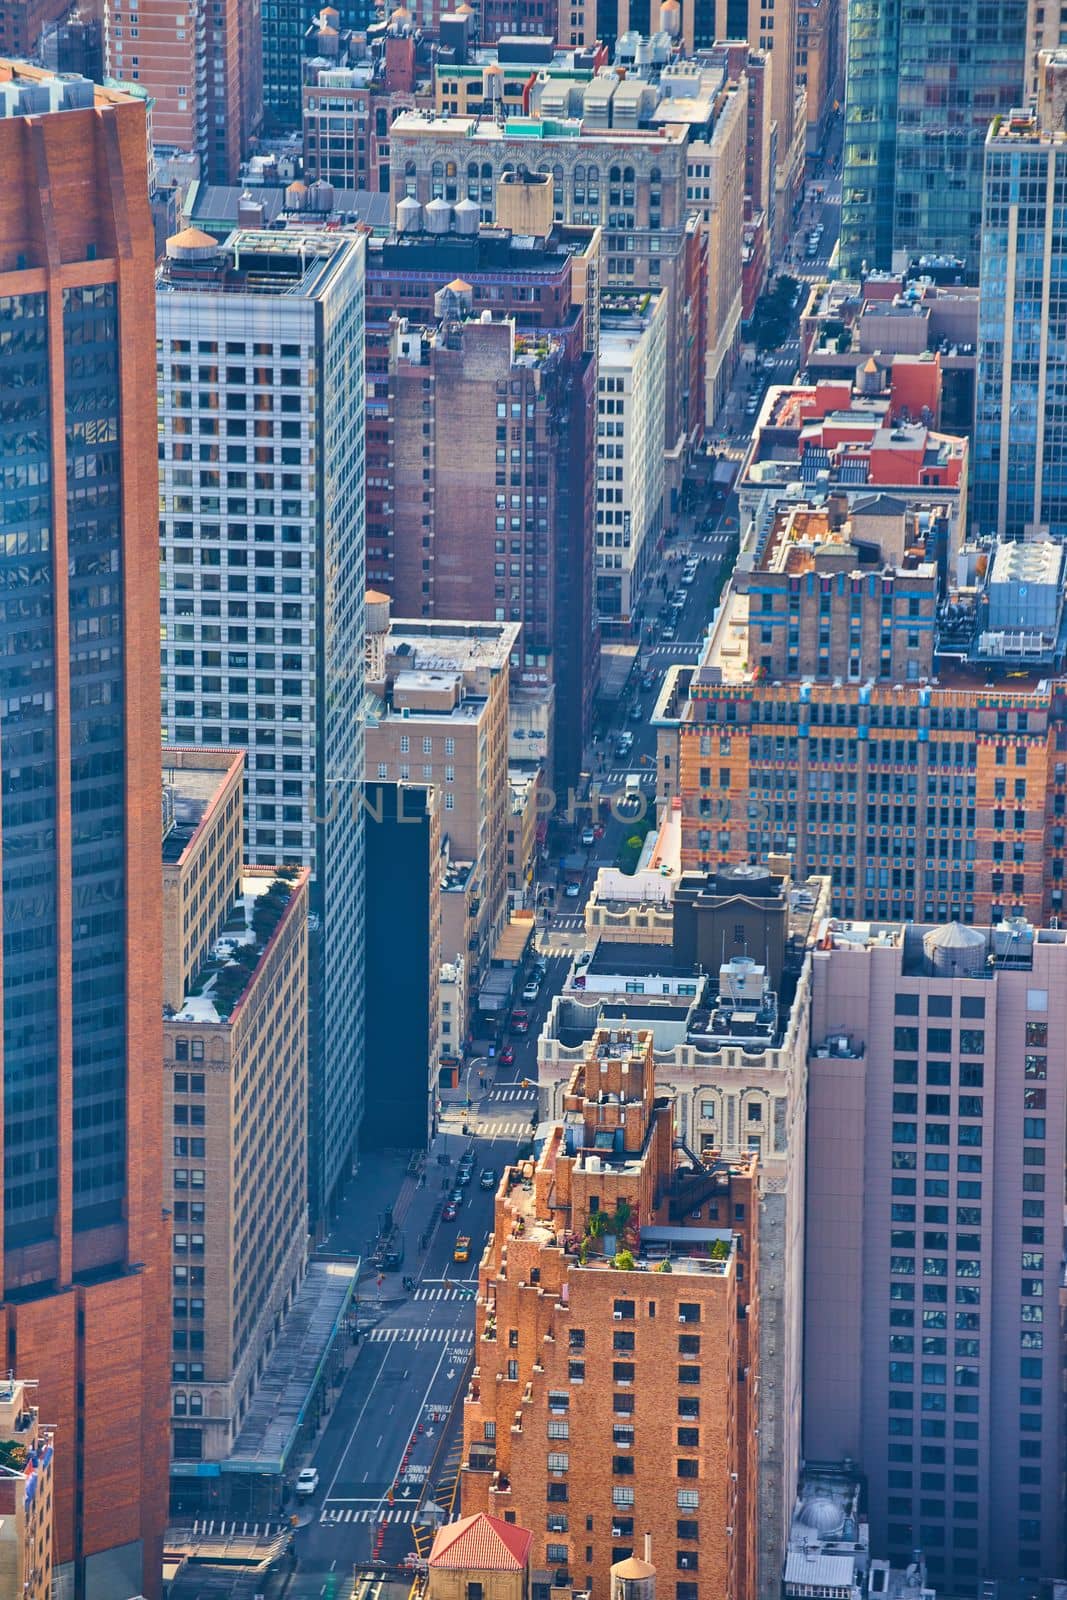 Image of Above New York City looking down street lined with skyscrapers